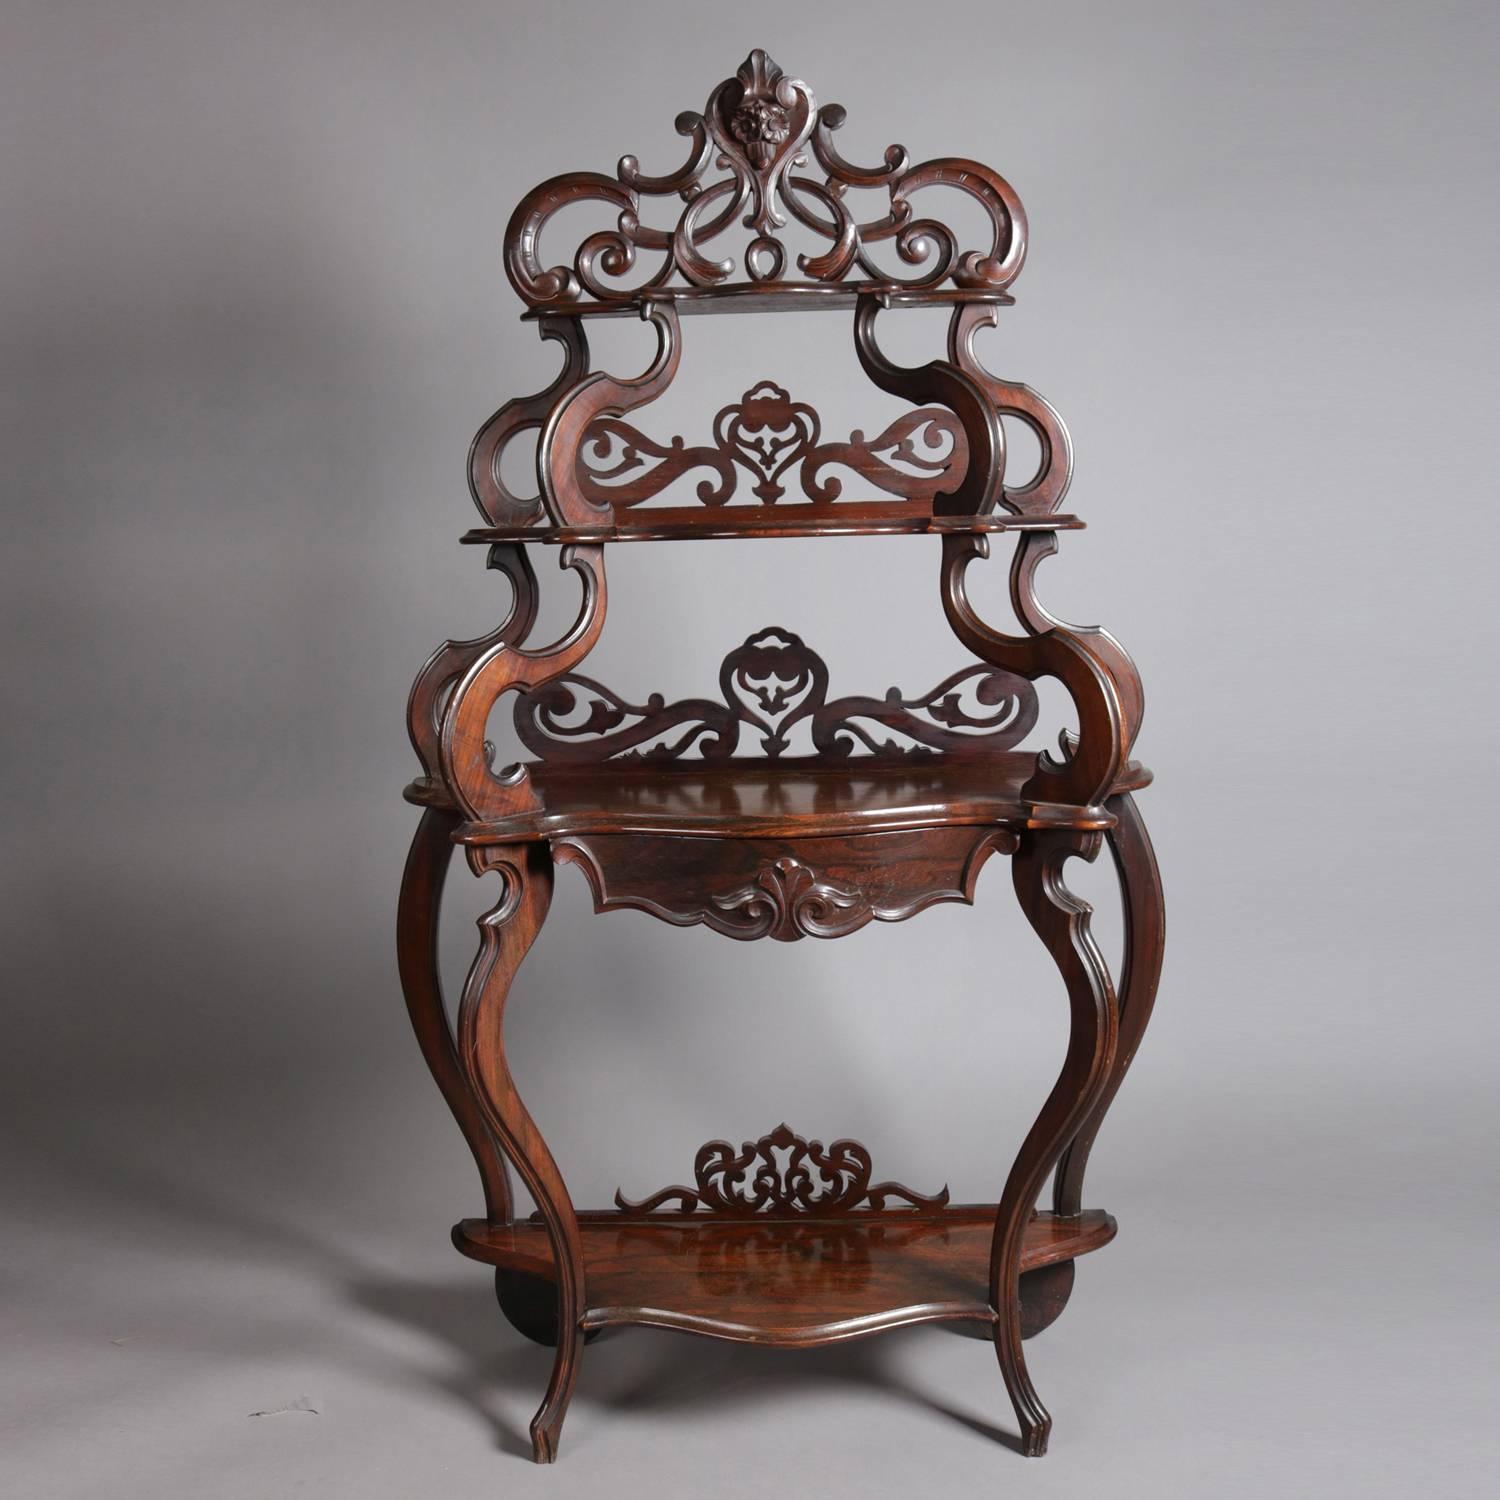 Antique Victorian Rococo carved rosewood etagere features four open display shelves, each with highly ornate carved and pierced foliate and scroll form backs and raised by s-scroll supports, 19th century.

Measures: 66